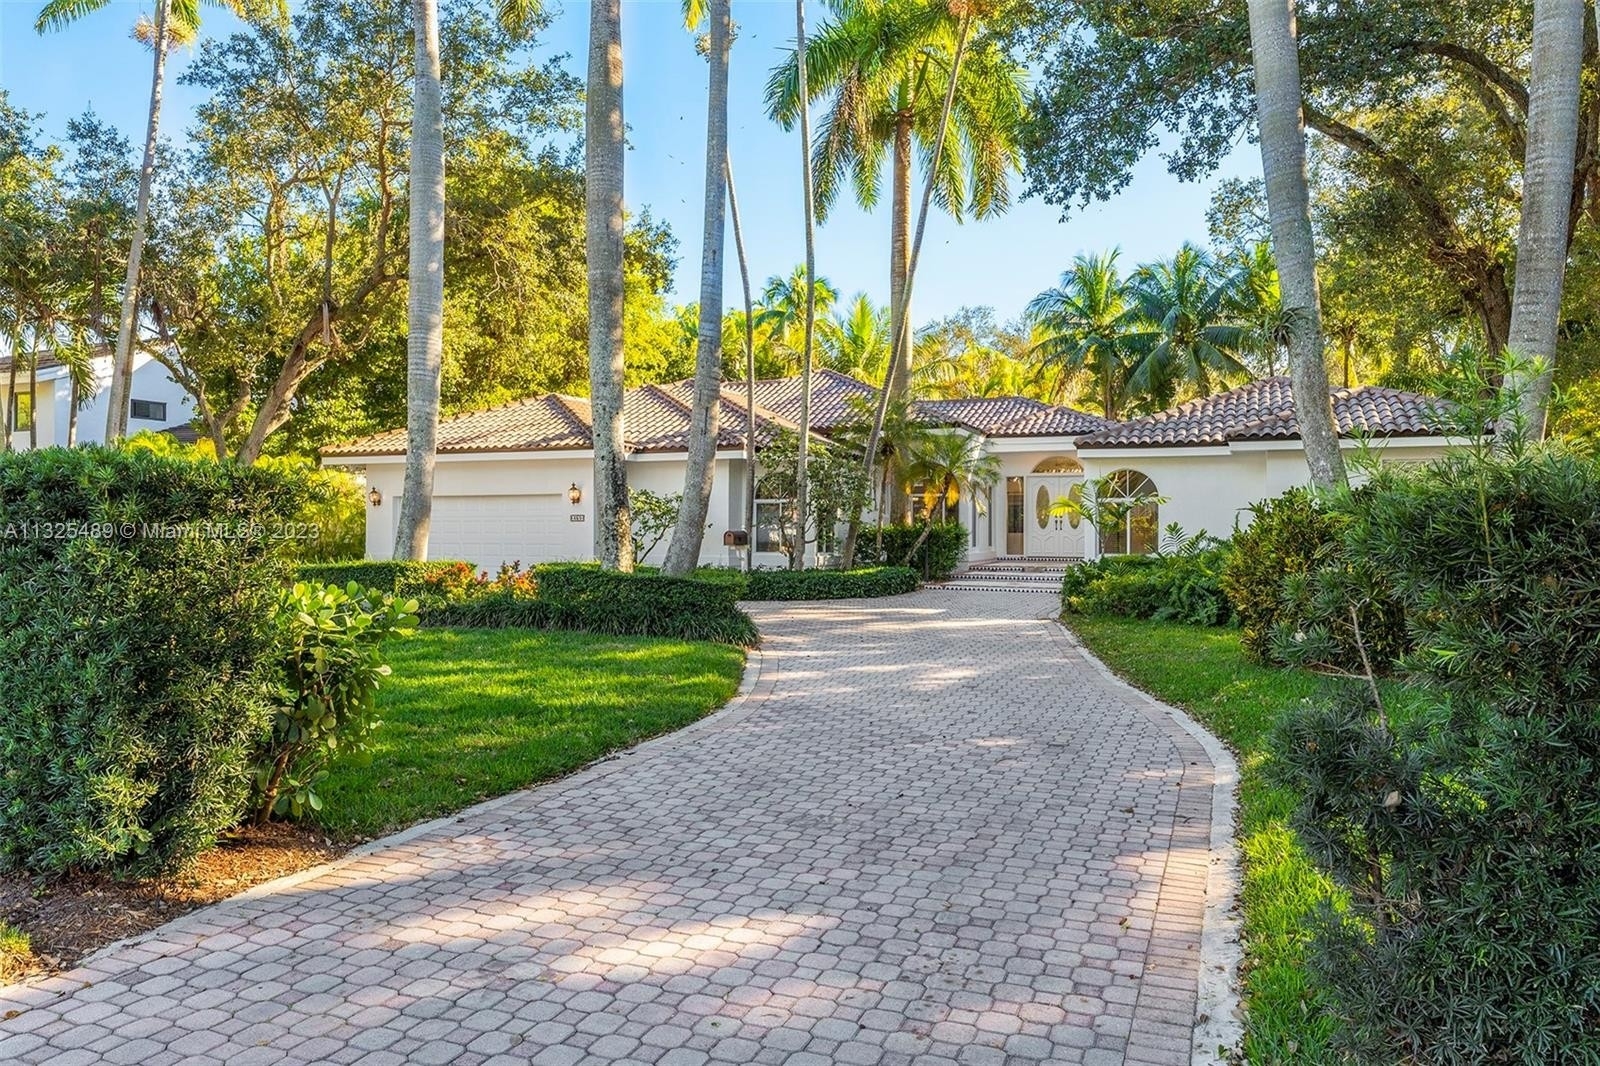 Single Family Home for Sale at Biscayne Bay, Coral Gables, FL 33143